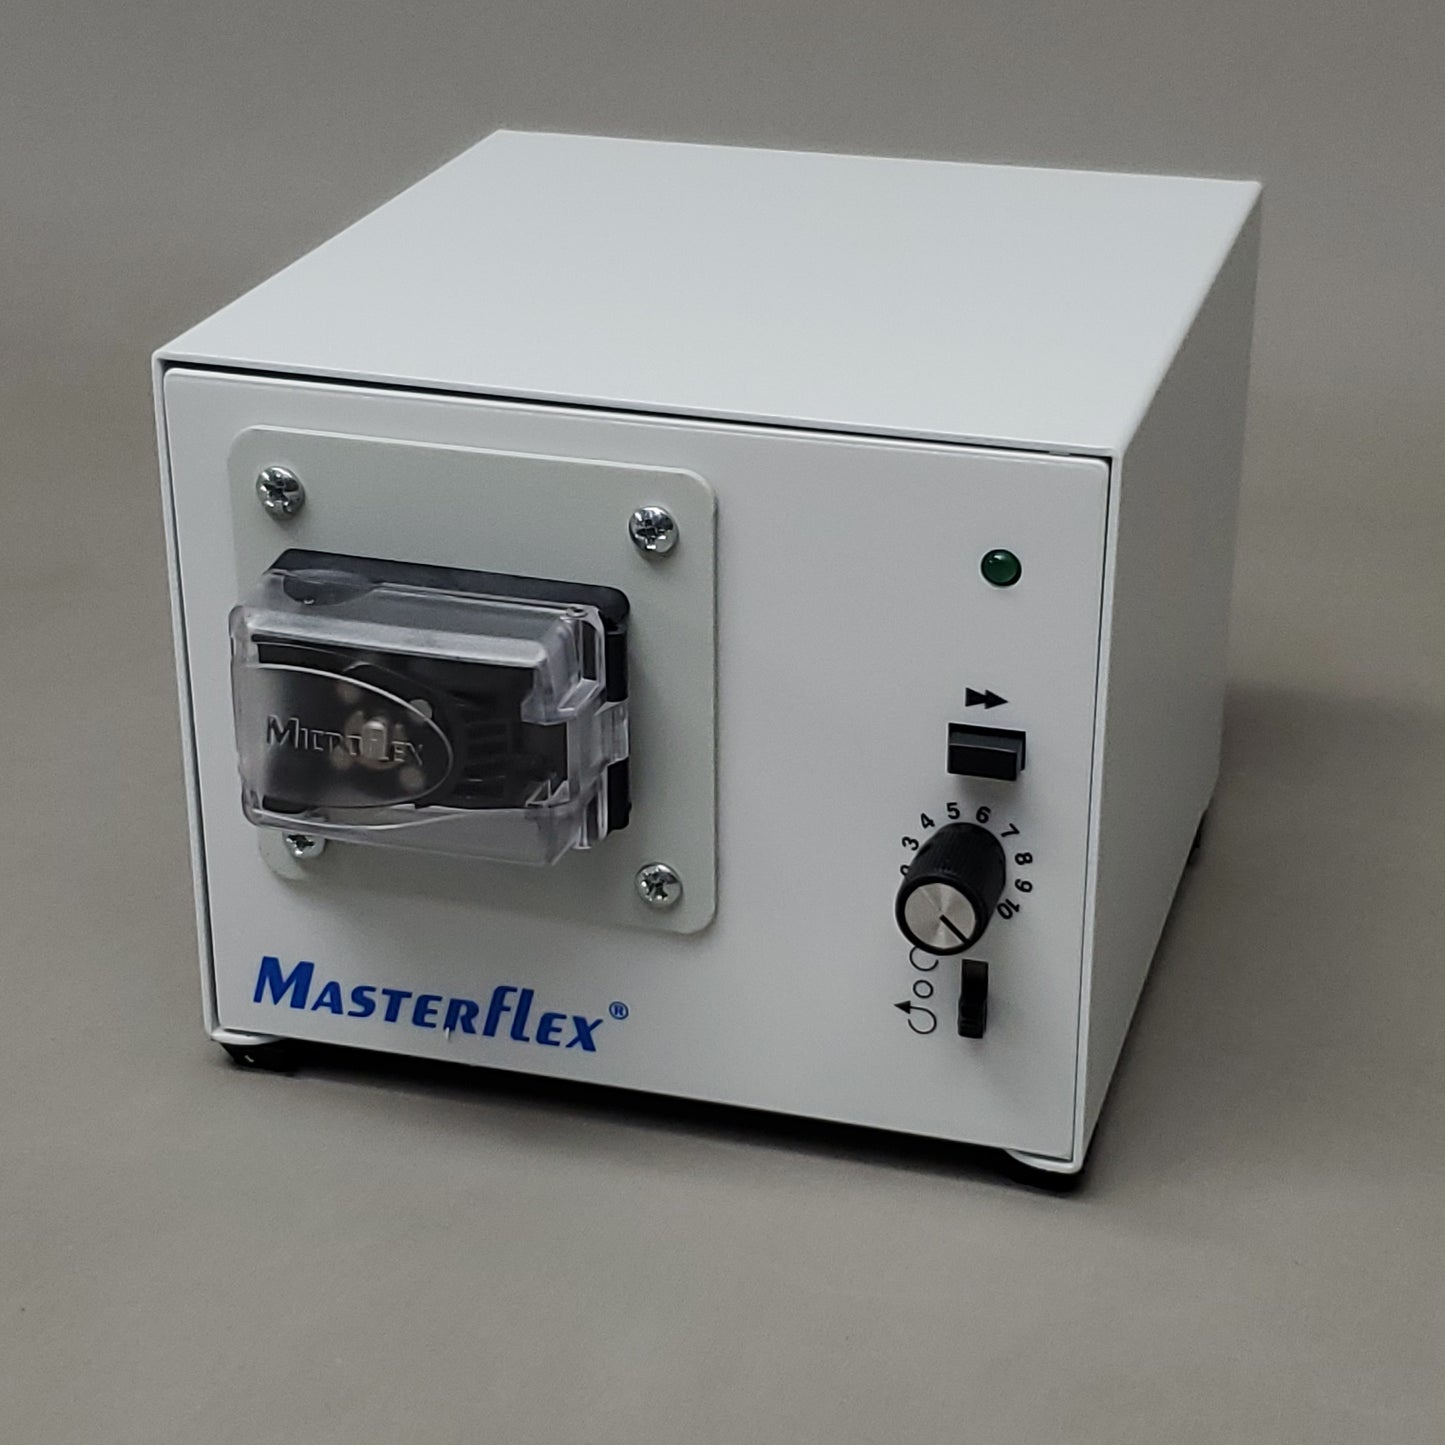 MASTERFLEX Ismatec Compact Single Channel Variable Speed Pump System 80RPM 77122-32 (New)